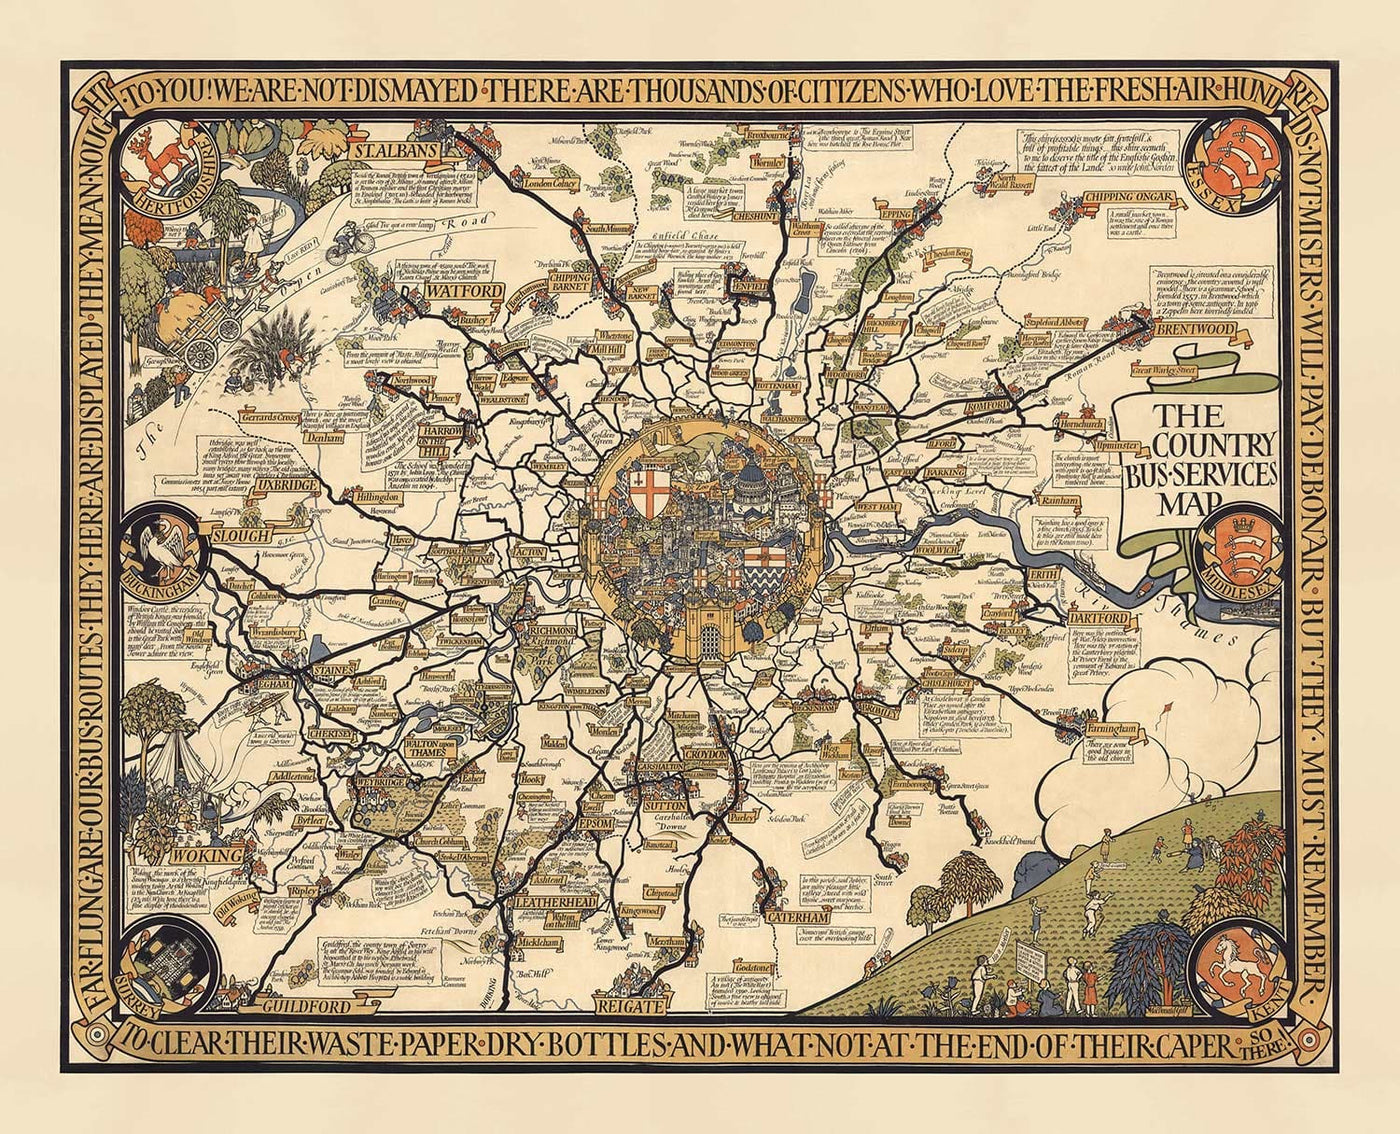 Old Pictorial Map of London, Suburbs & Commuter Belt, 1928, by Max Gill - "Far flung are our bus routes"